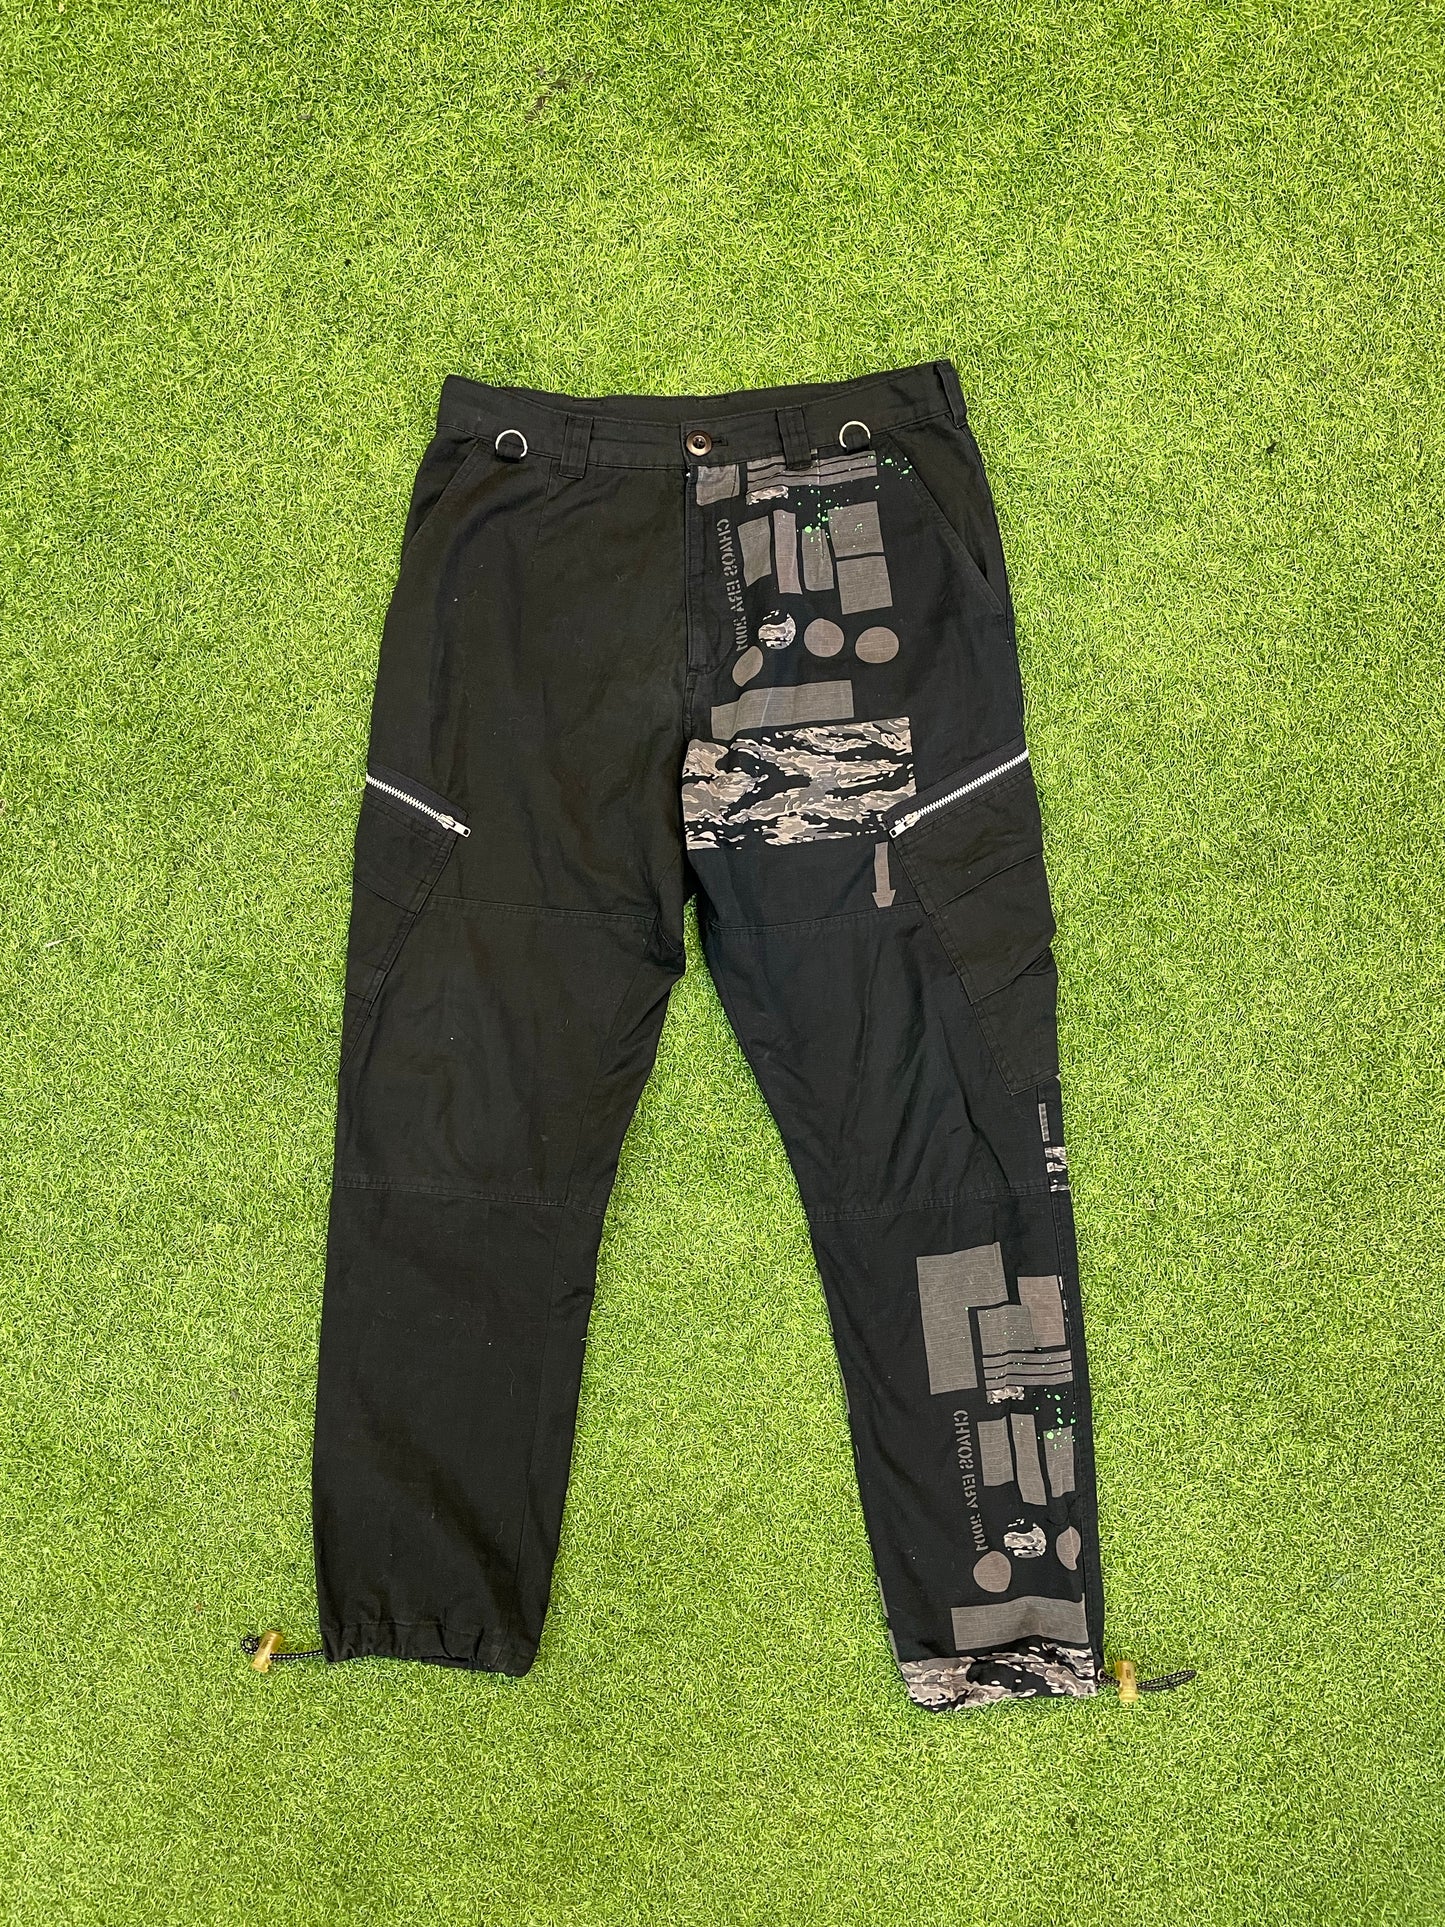 SS2001’ Chaotic Discord - Undercover Digicamo Patchwork Cargo Pant